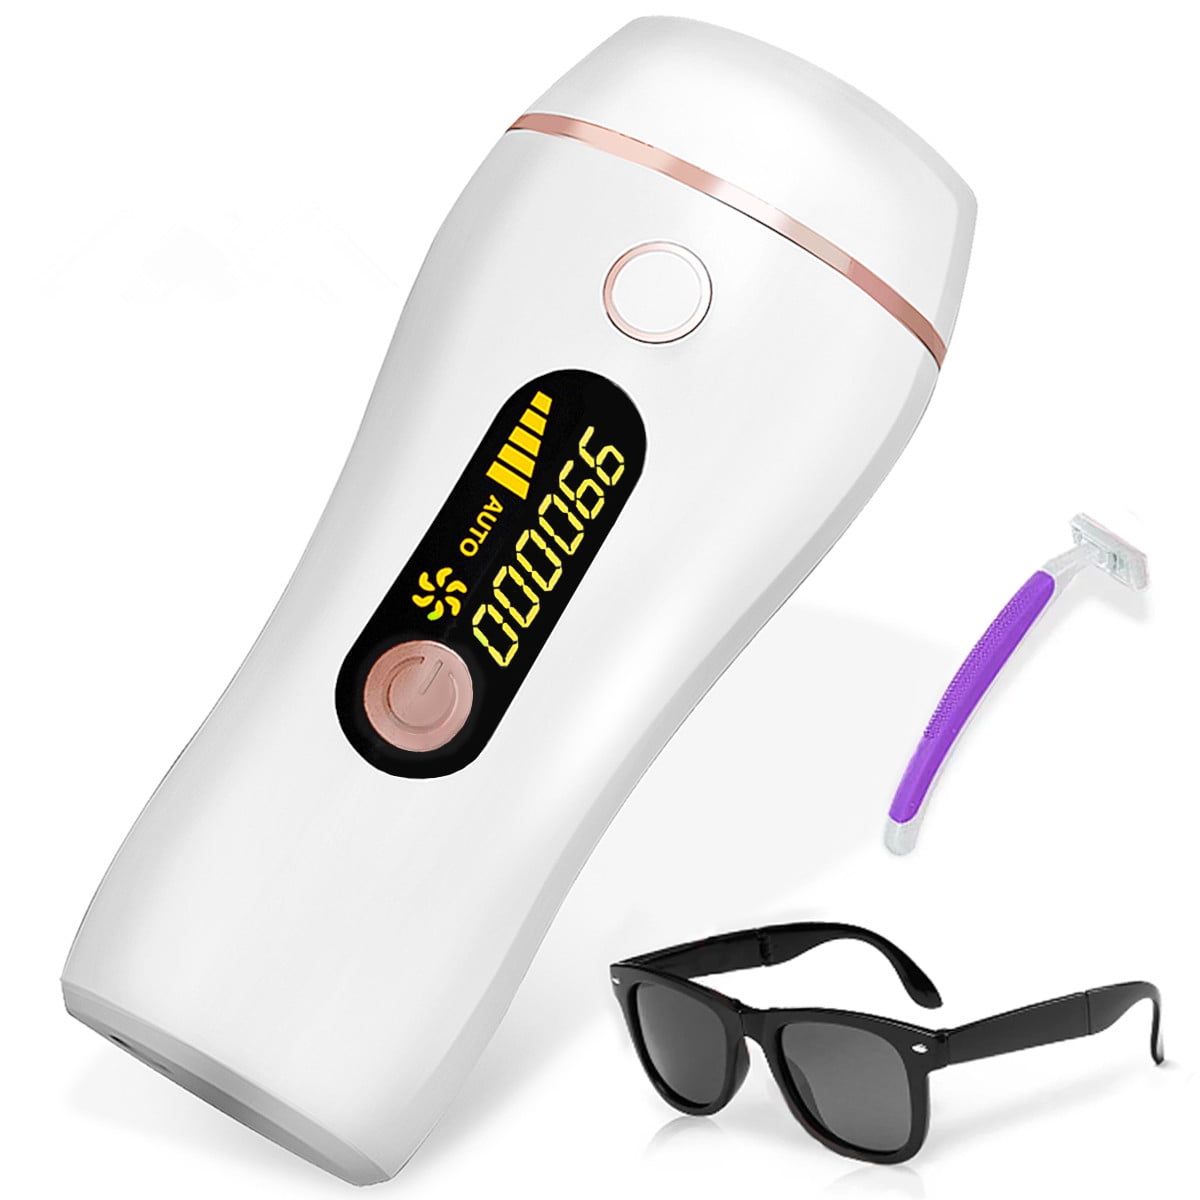 Mod peber sangtekster IPL Laser Hair Removal Device, 2-In-1 Permanent & Painless Hair Remover for  Women and Men, 5 Modes with Razor and Goggles, LCD Display, Flawless Face  Body Epilation at Home - Walmart.com